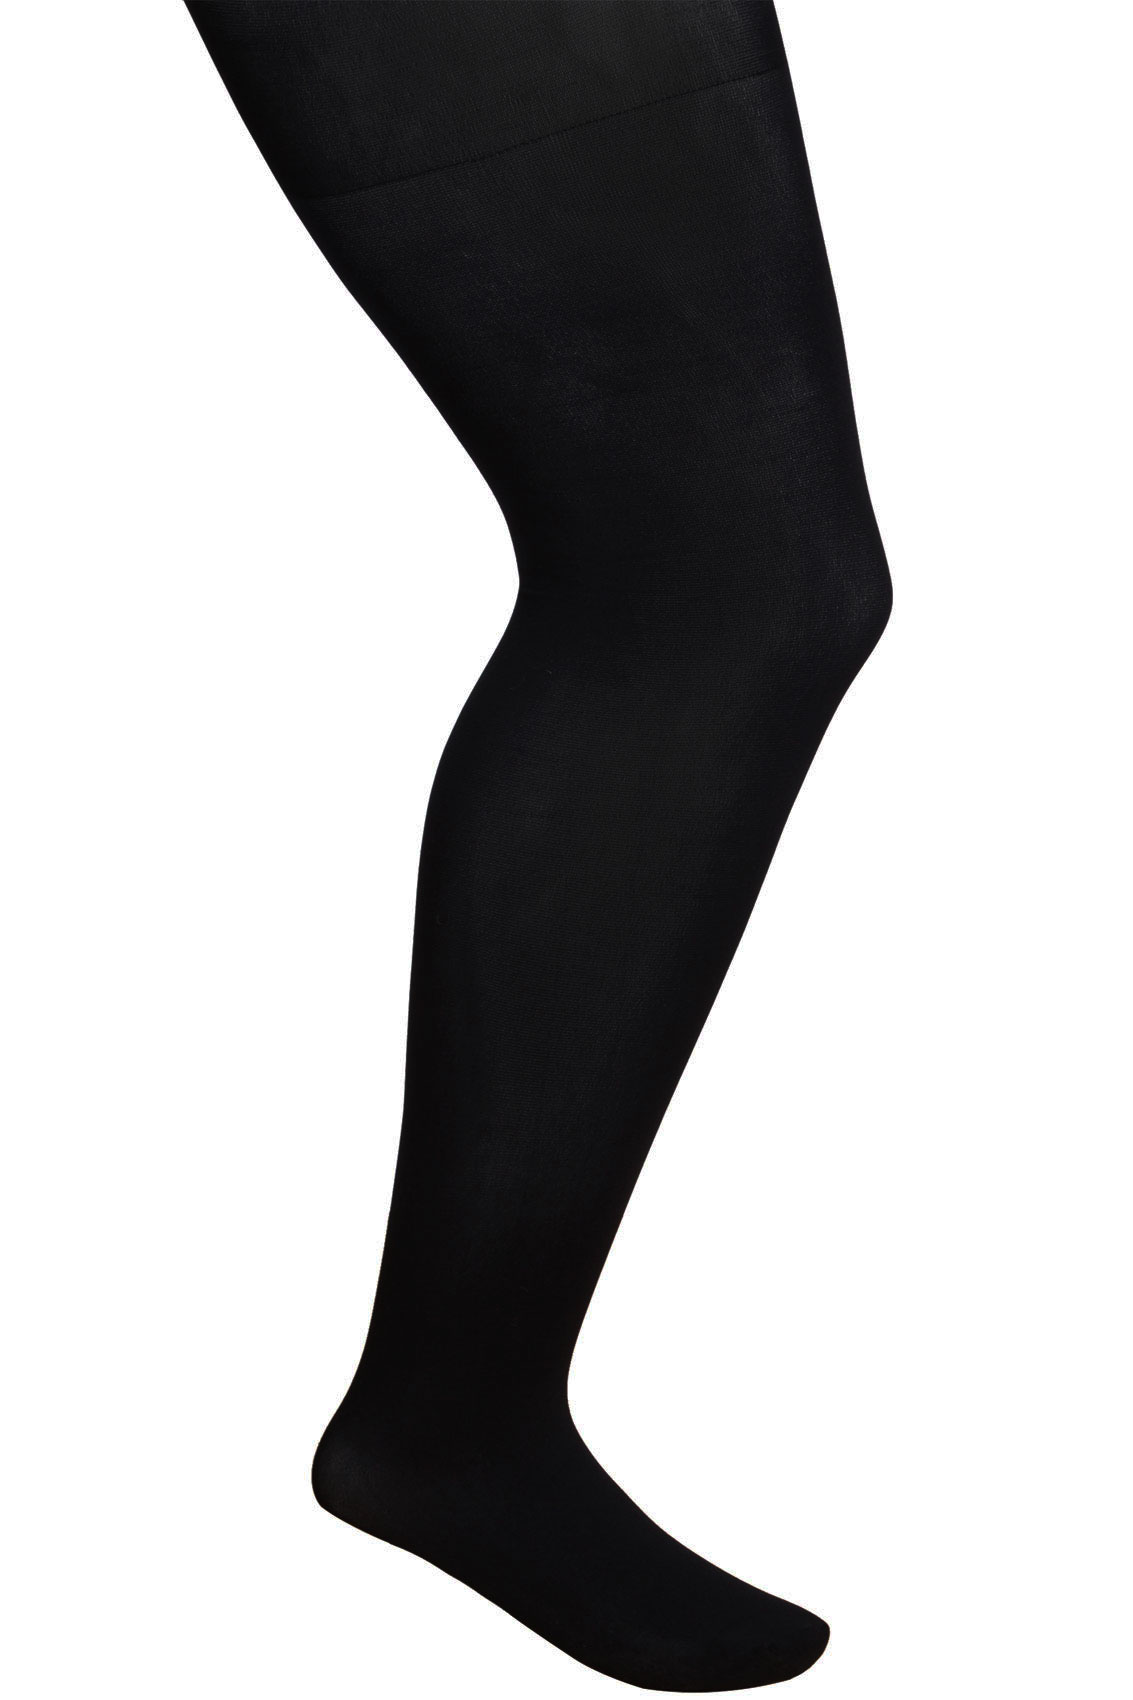 Black 120 Denier Tights, Plus size 16 to 32 | Yours Clothing